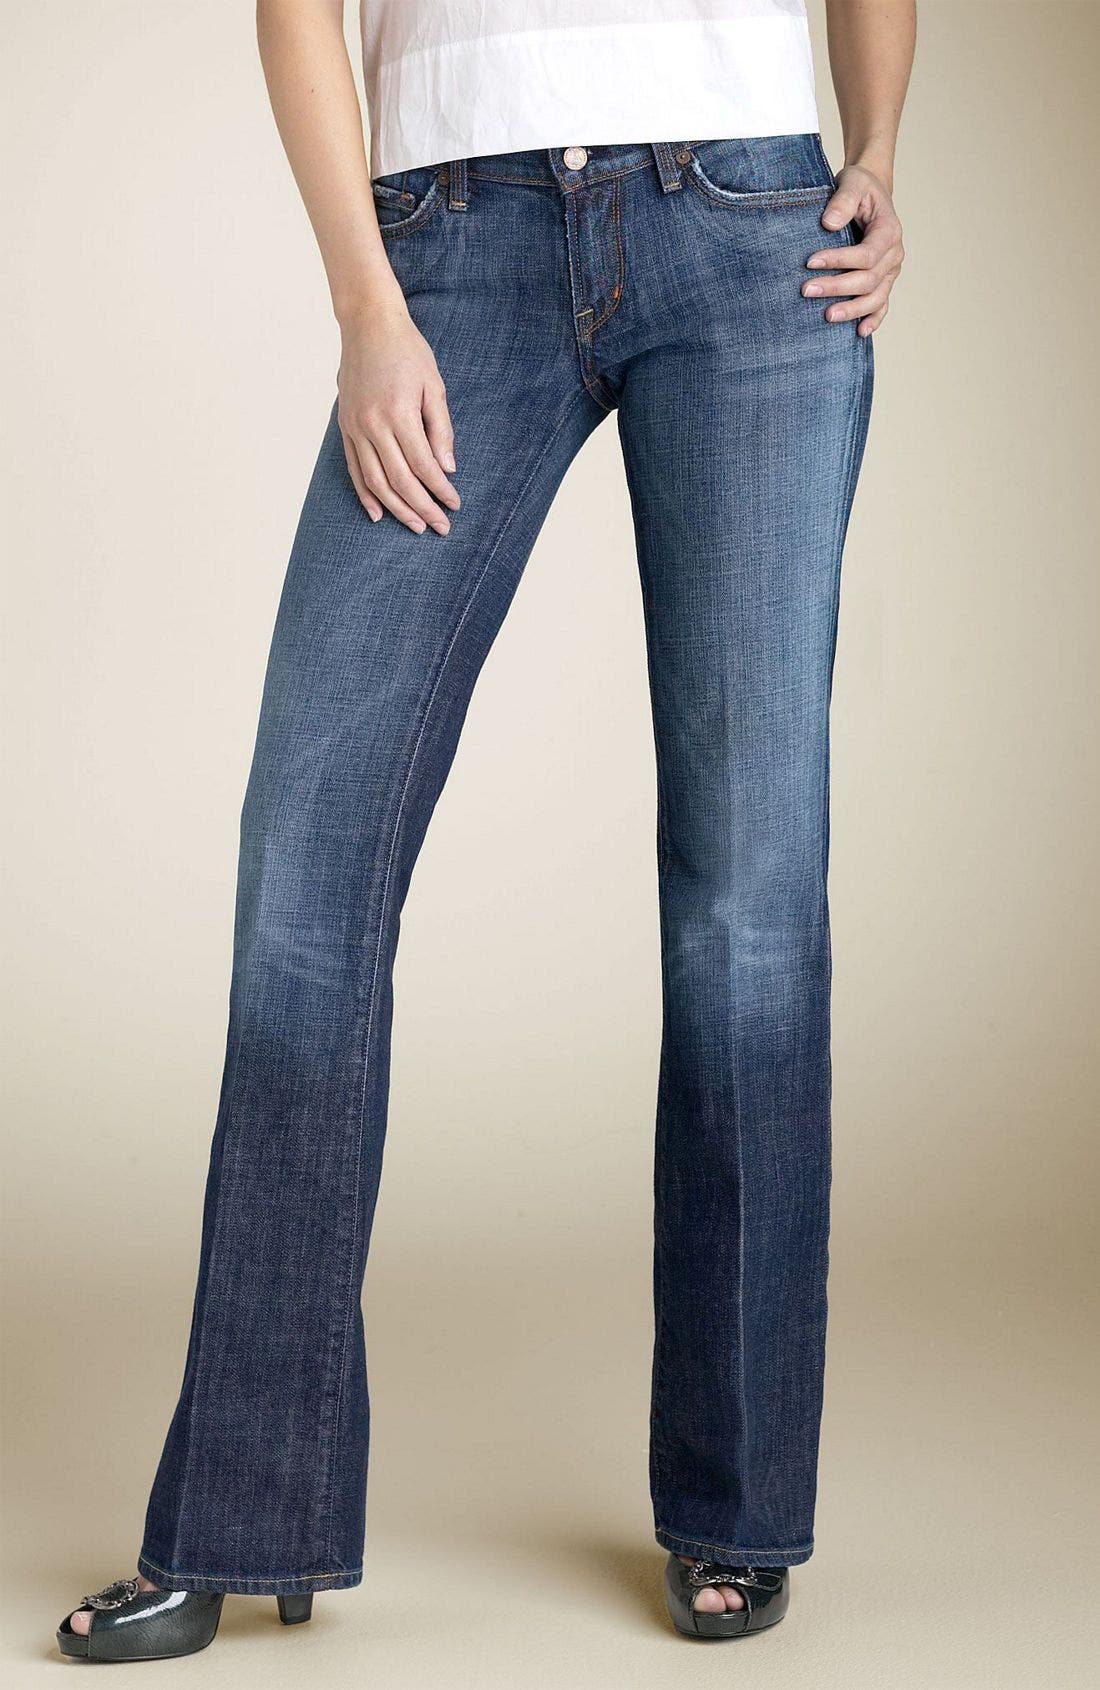 citizens of humanity jeans price